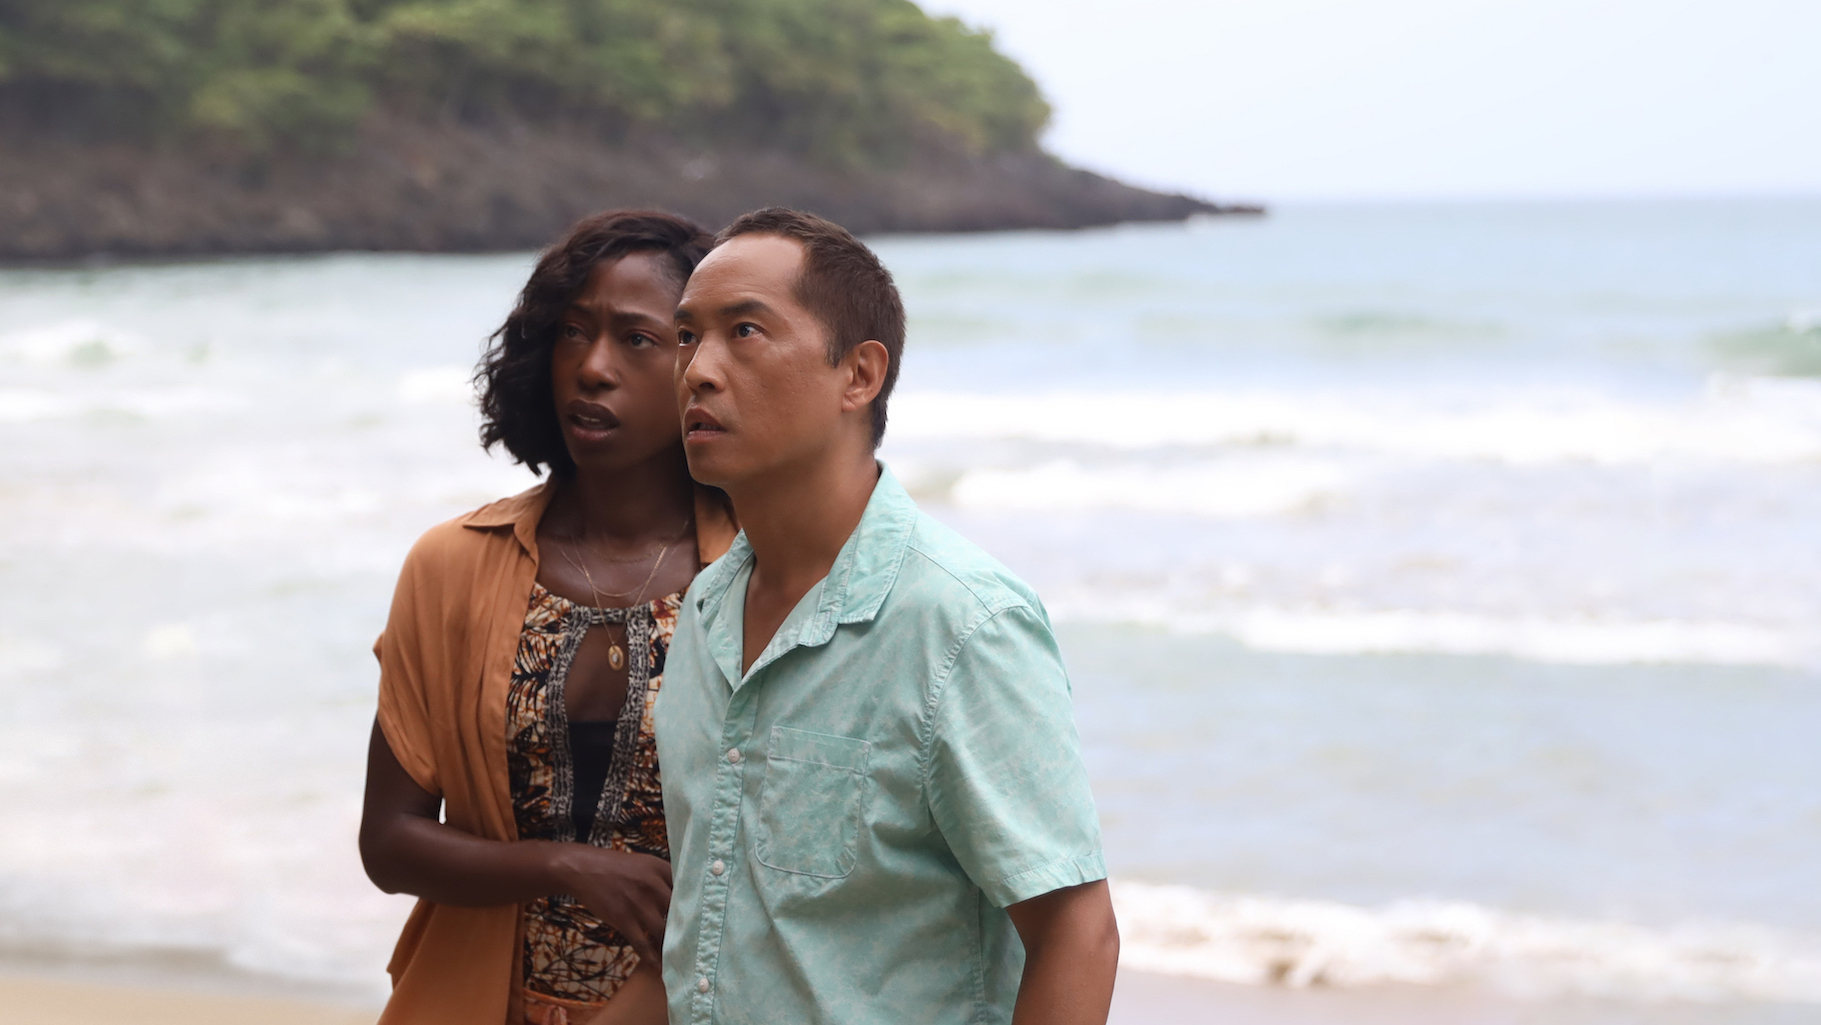 (from left) Patricia (Nikki Amuka-Bird) and Jarin (Ken Leung) in Old, written for the screen and directed by M. Night Shyamalan.